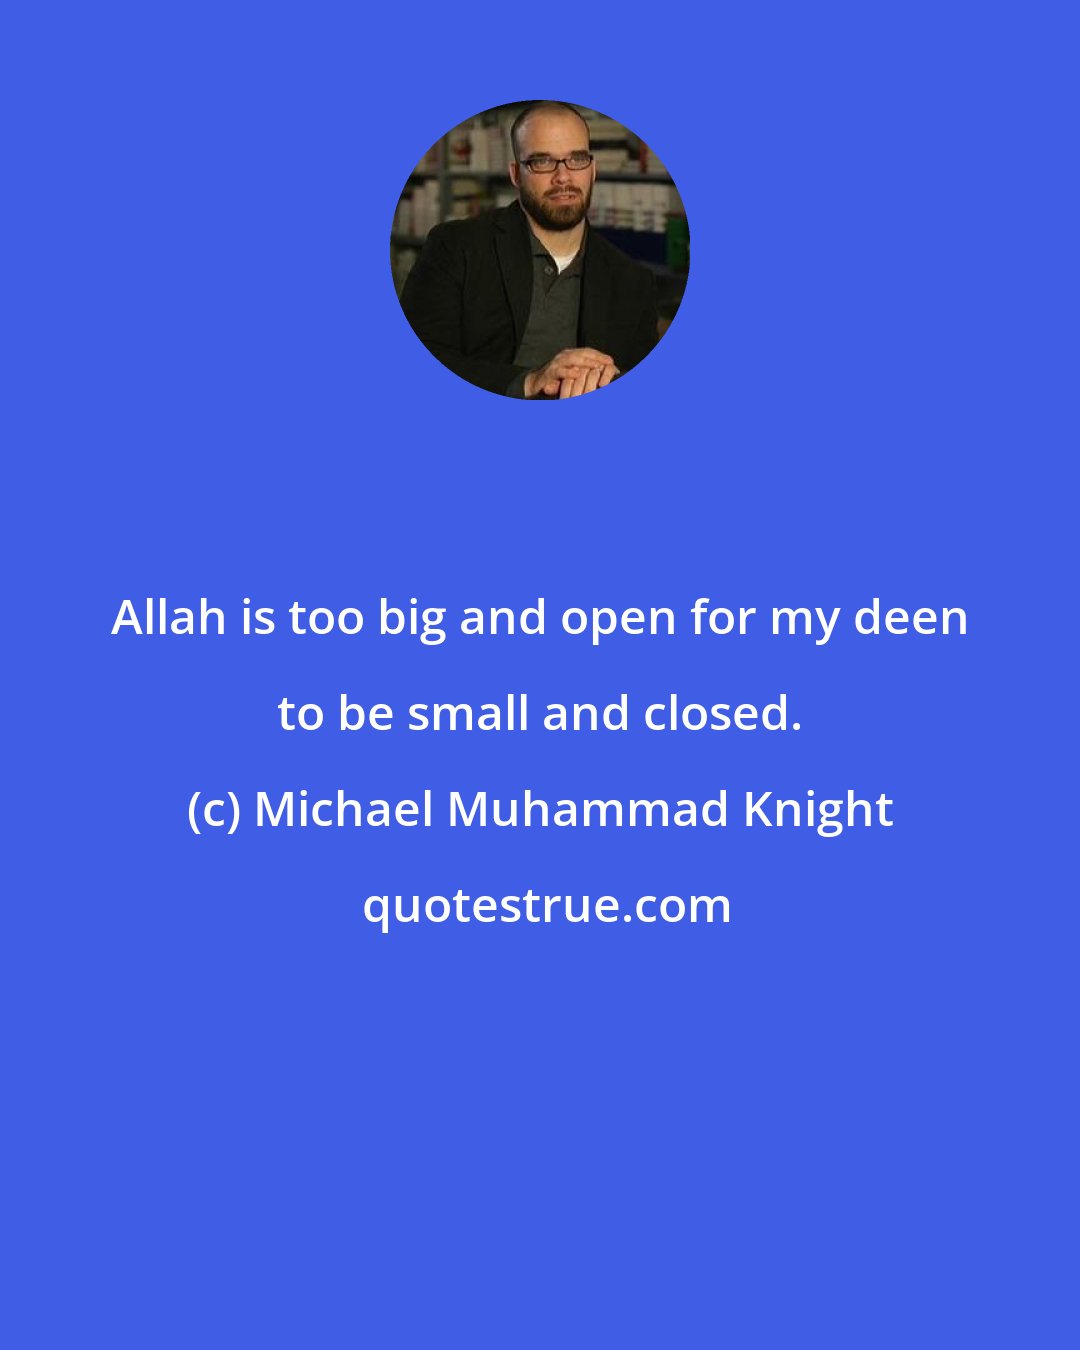 Michael Muhammad Knight: Allah is too big and open for my deen to be small and closed.